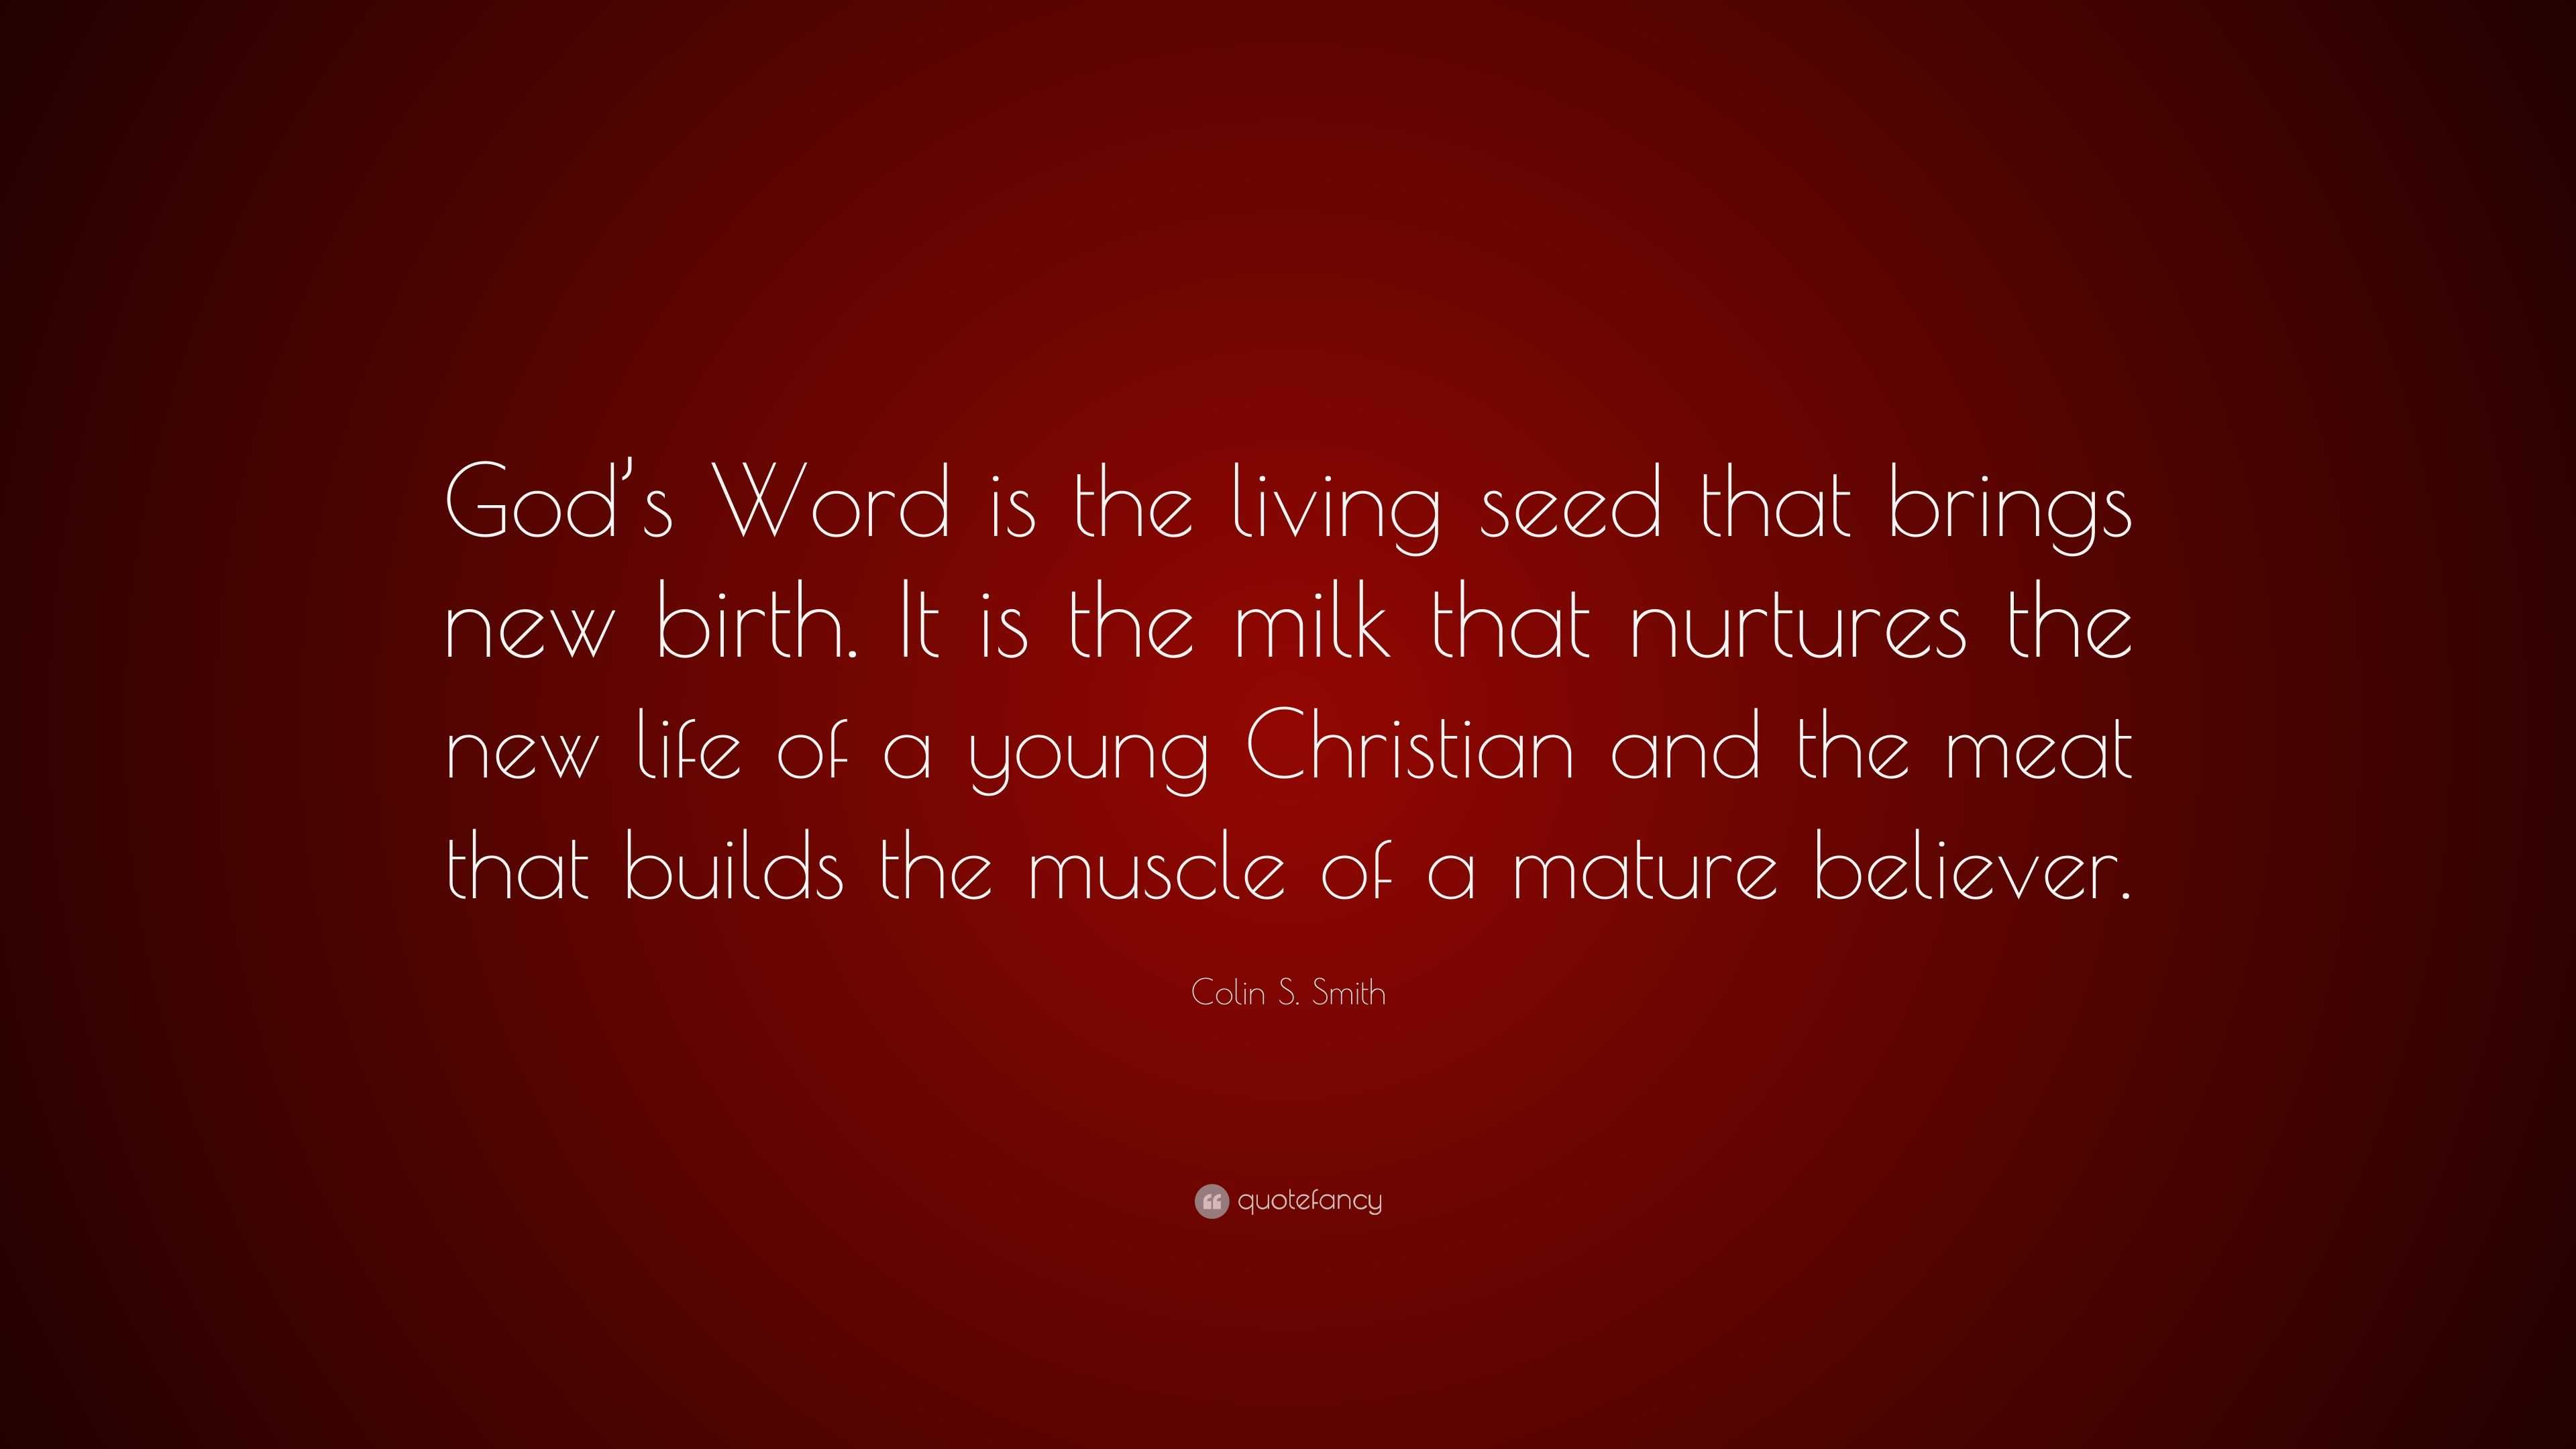 Colin S Smith Quote “God s Word is the living seed that brings new